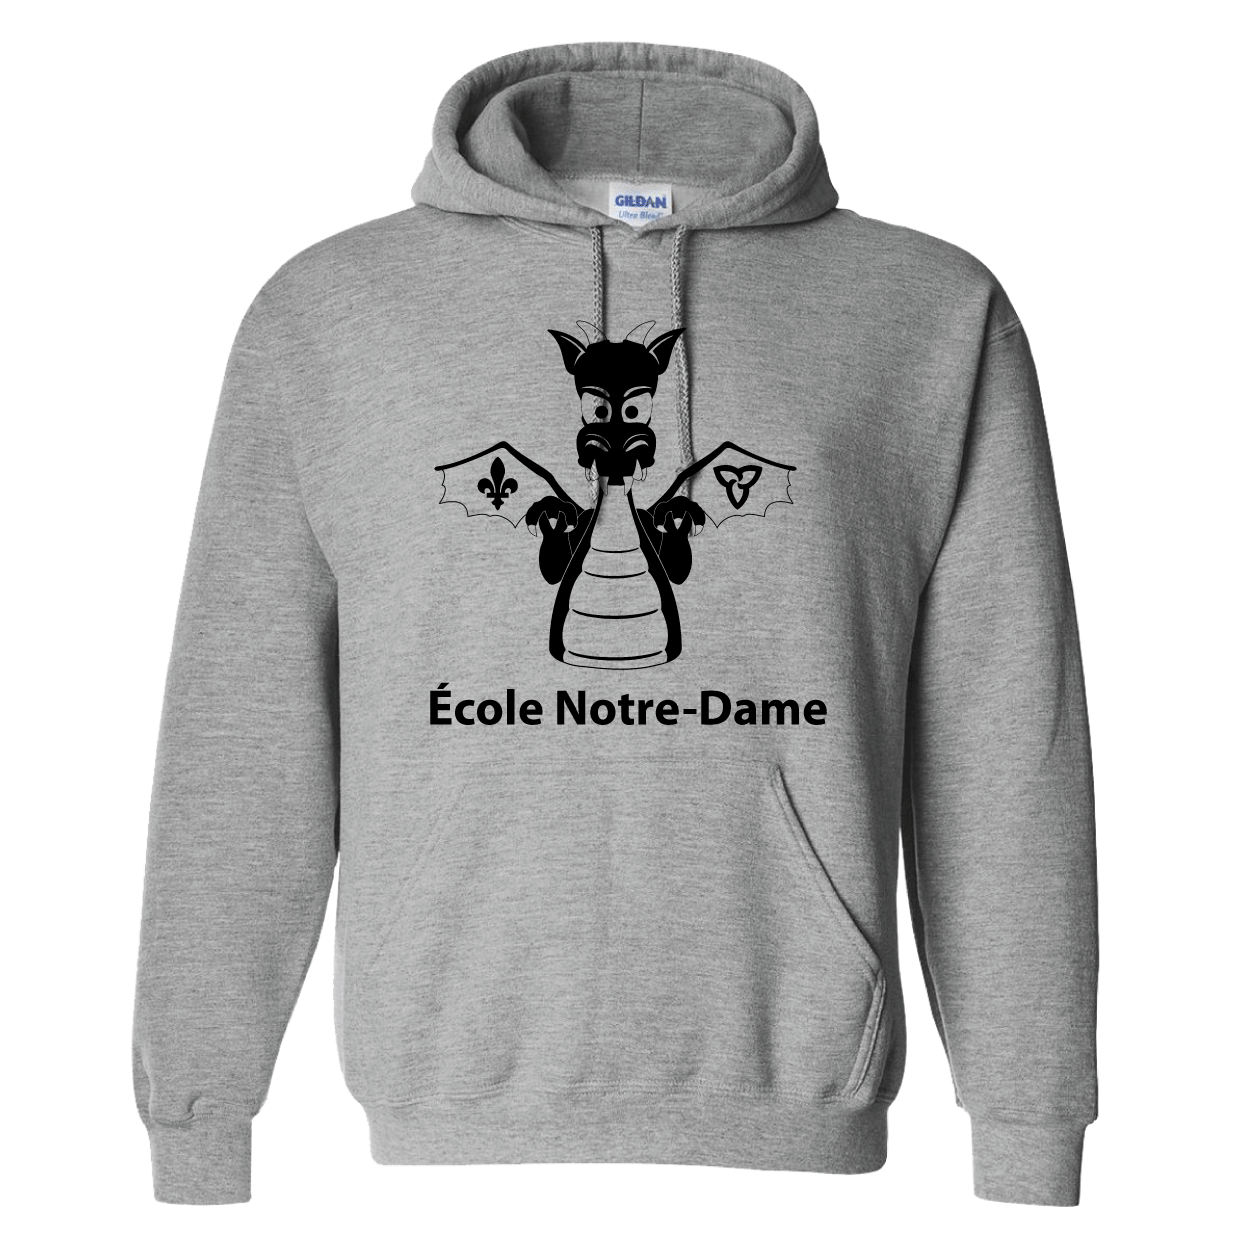 Notre-Dame Hoodie - One Colour Print